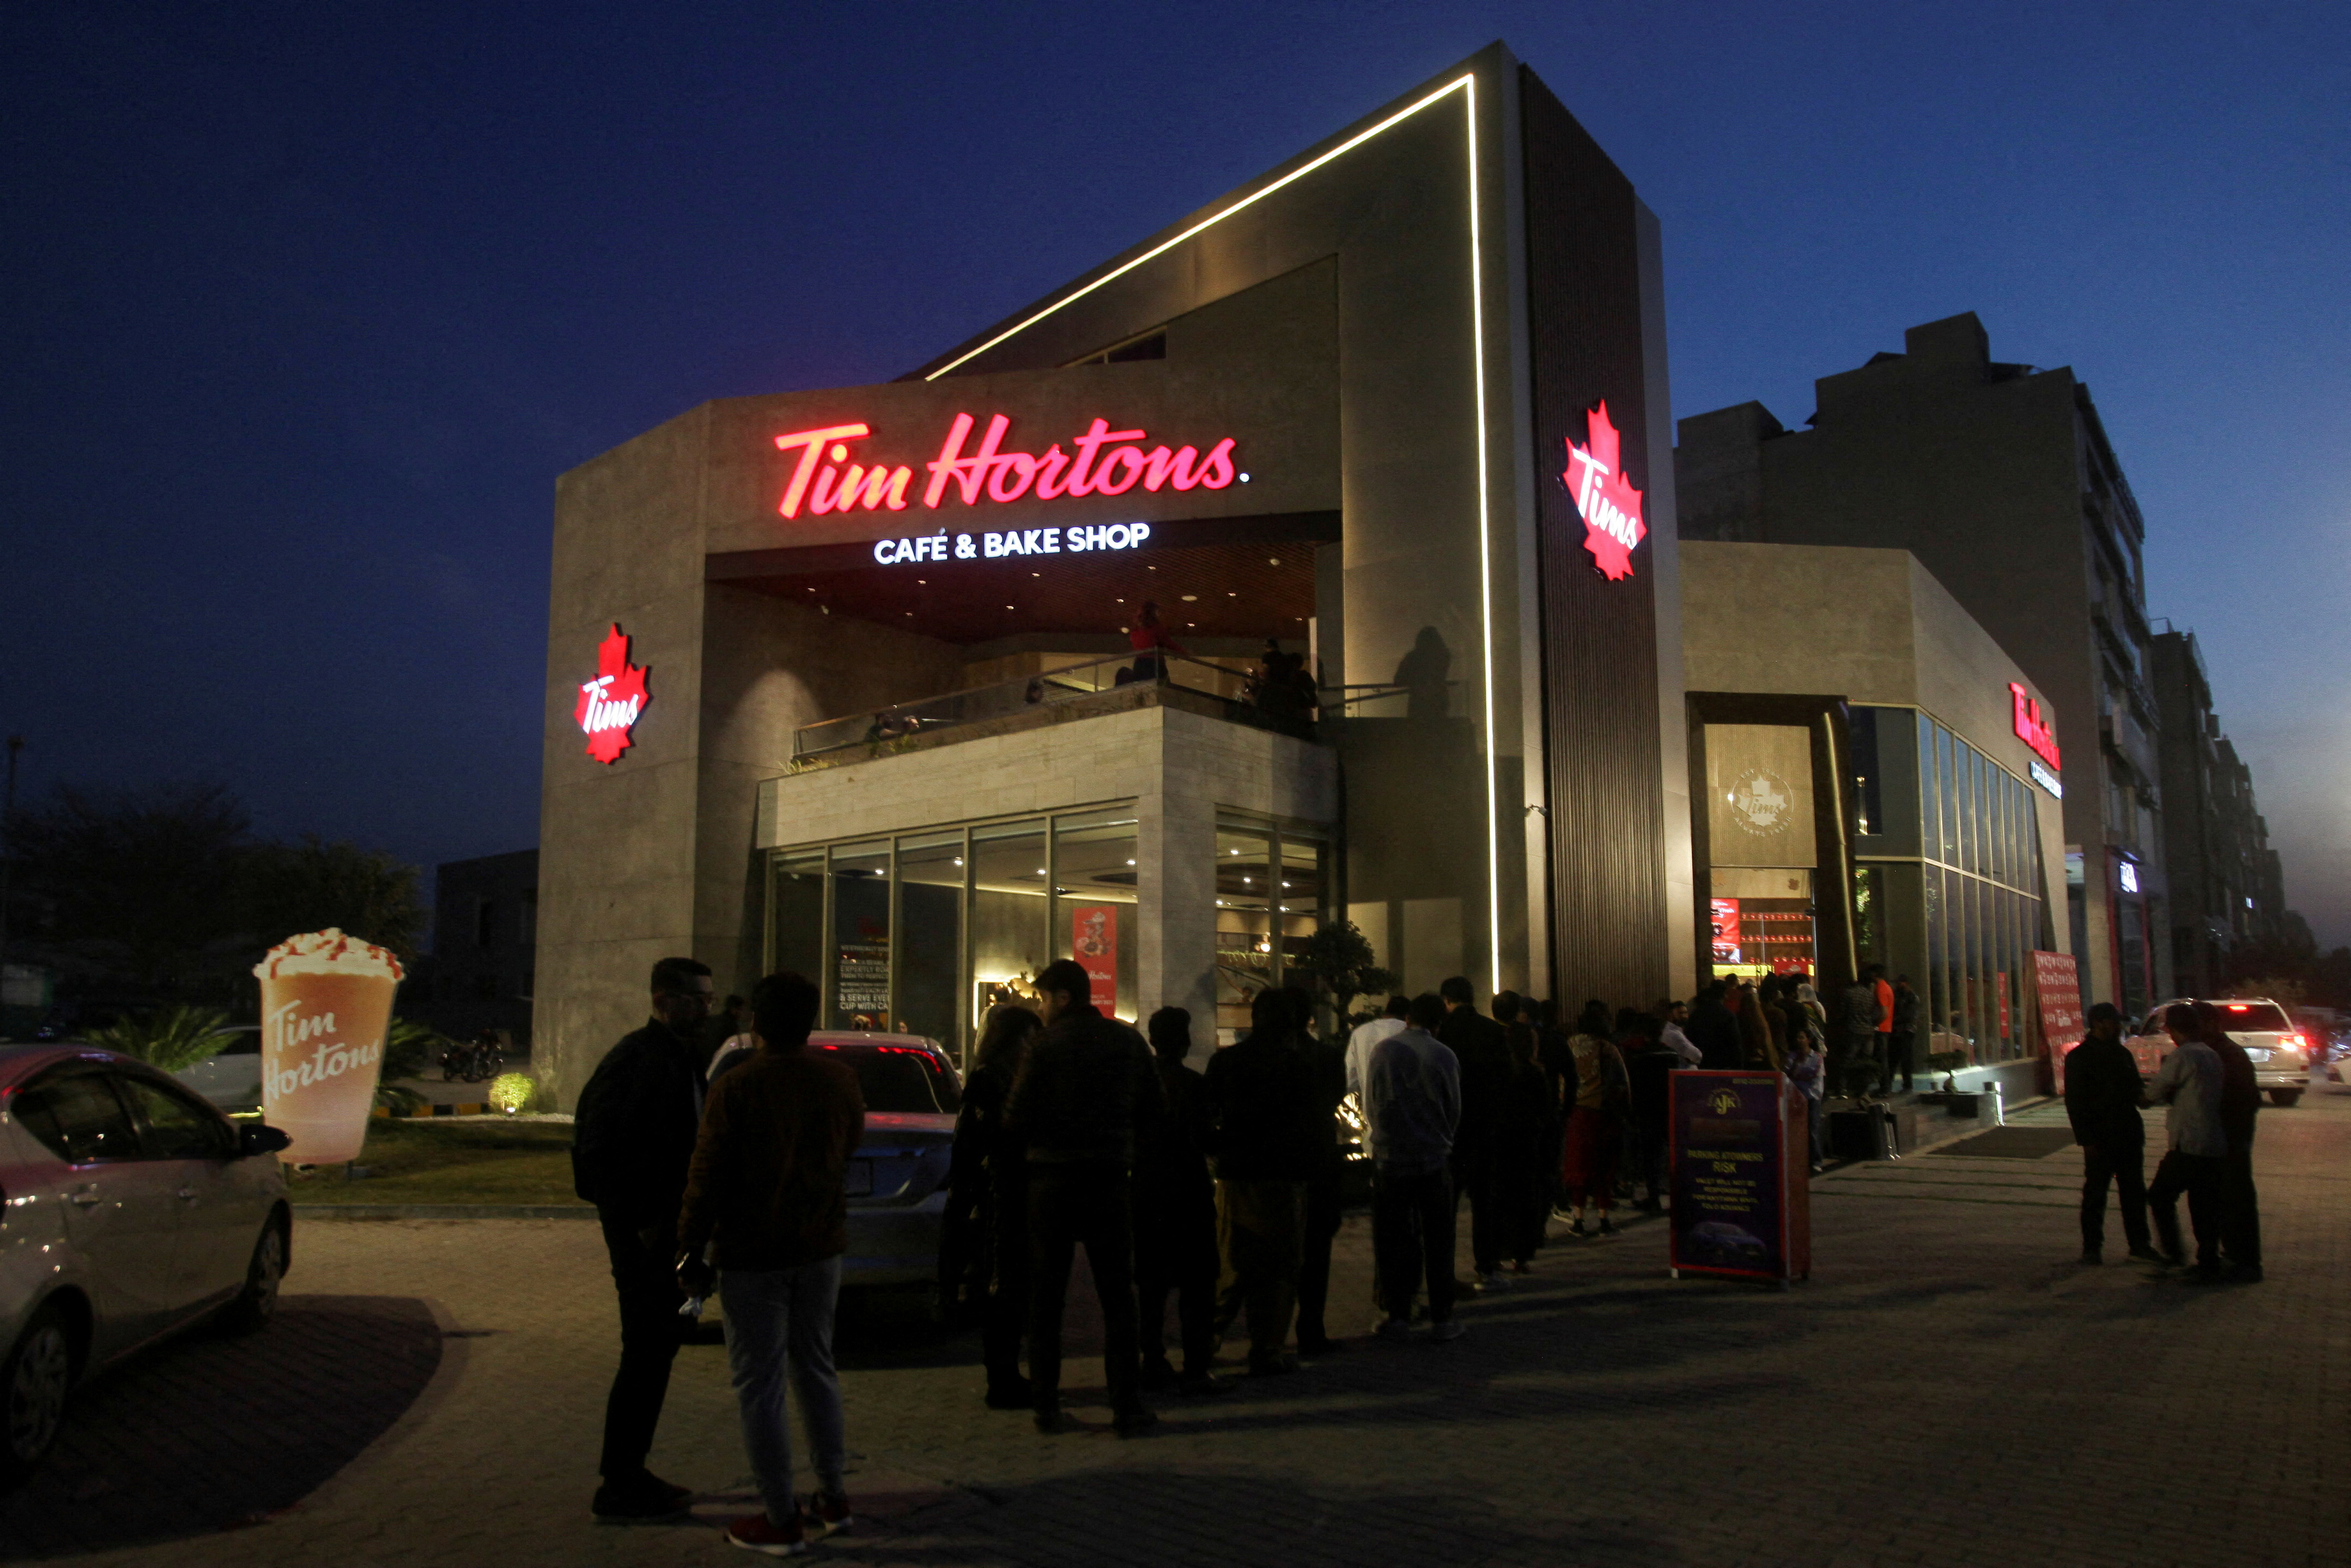 Board of Tim Hortons franchisee group resigns - The Globe and Mail